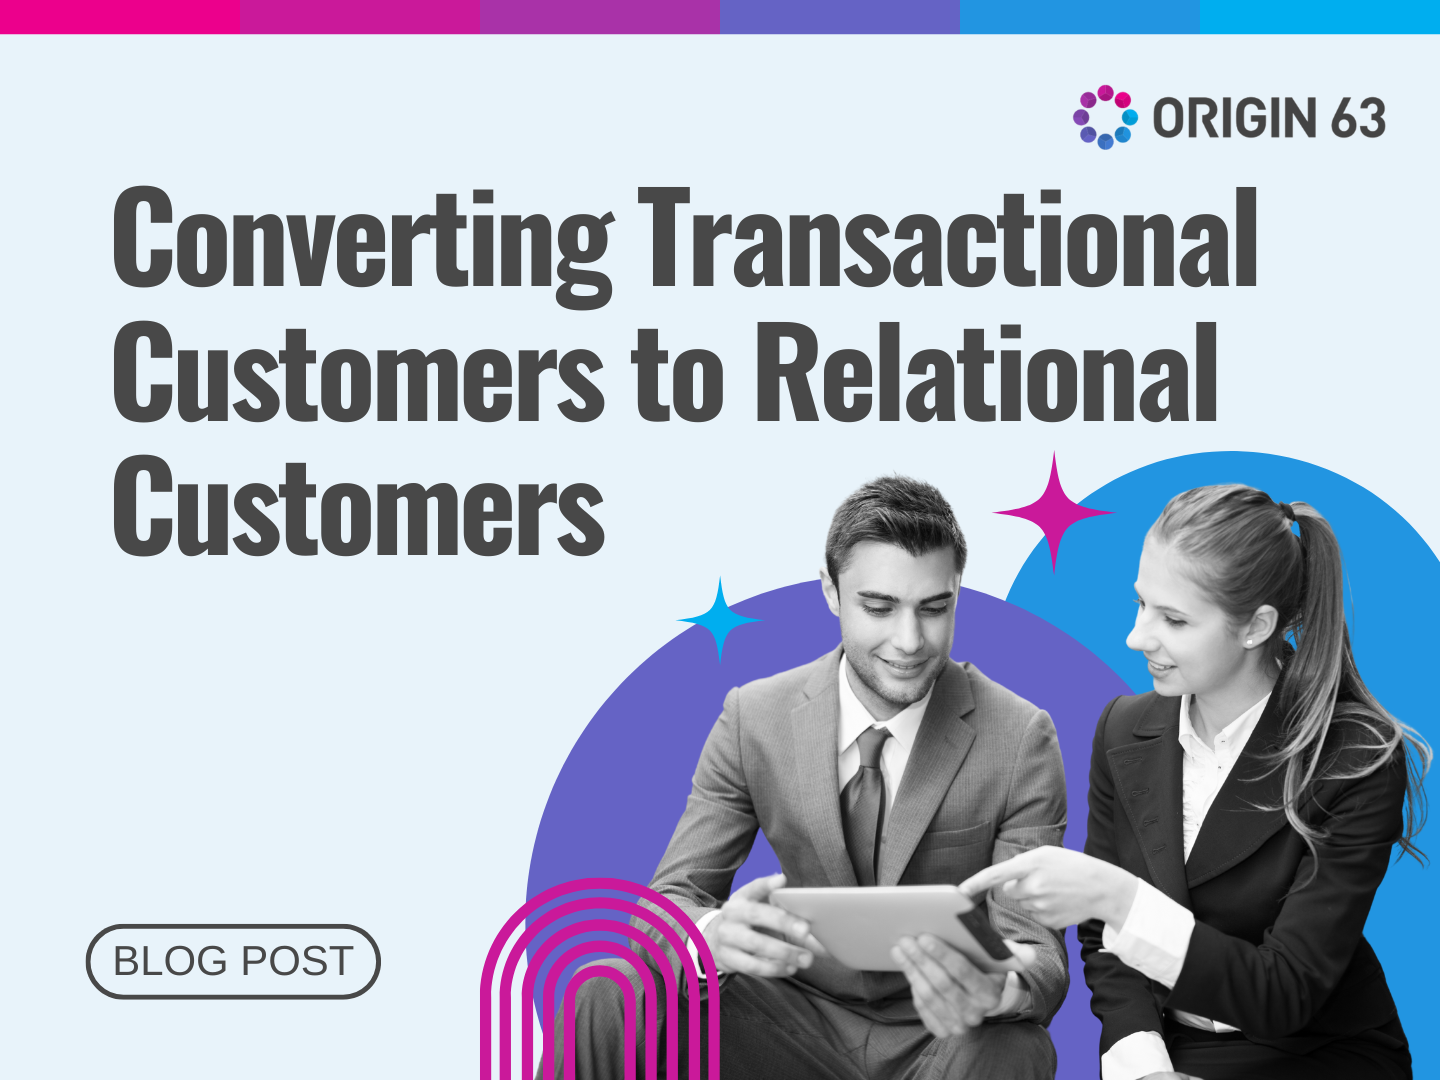 Turn one-time buyers into loyal customers! Learn how to ditch transactional service and build lasting relationships.